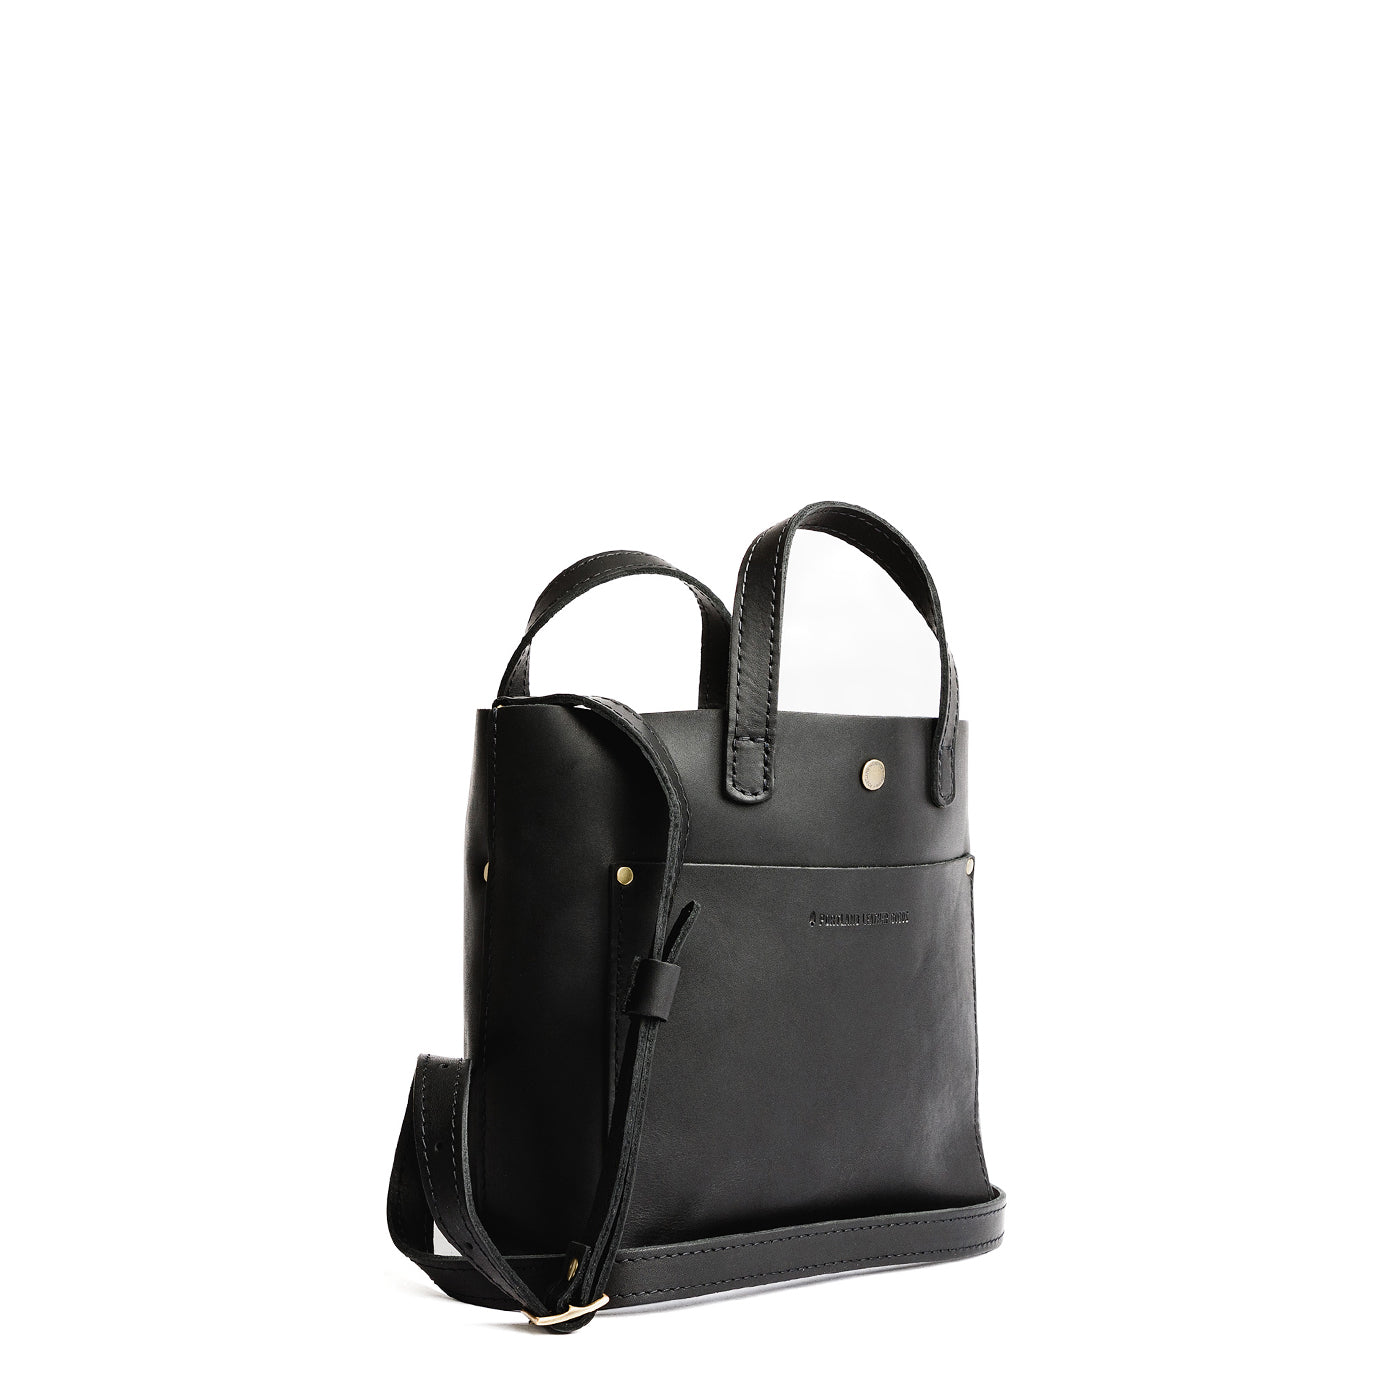 Black*Classic | Crossbody tote bag with snap closure and front pocket